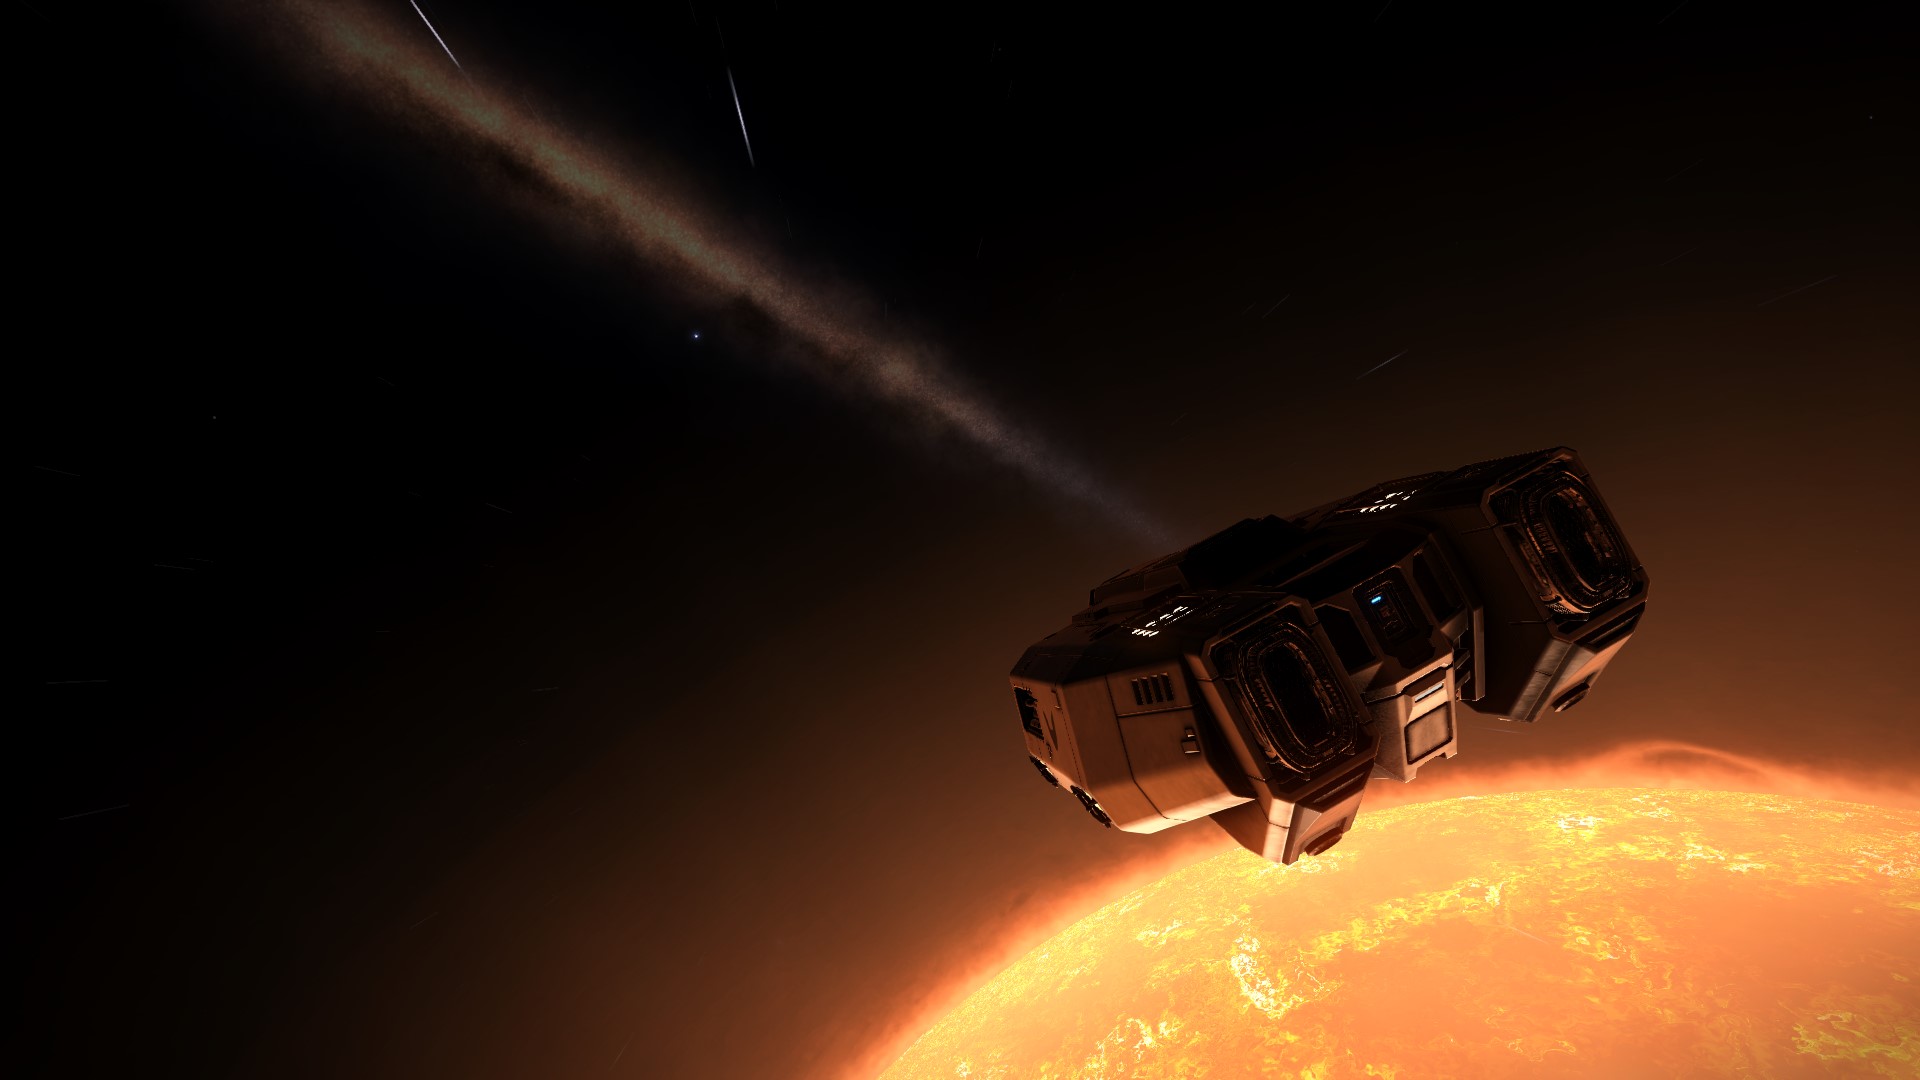 Elite: Dangerous Planetary base raid footage featuring buggies and